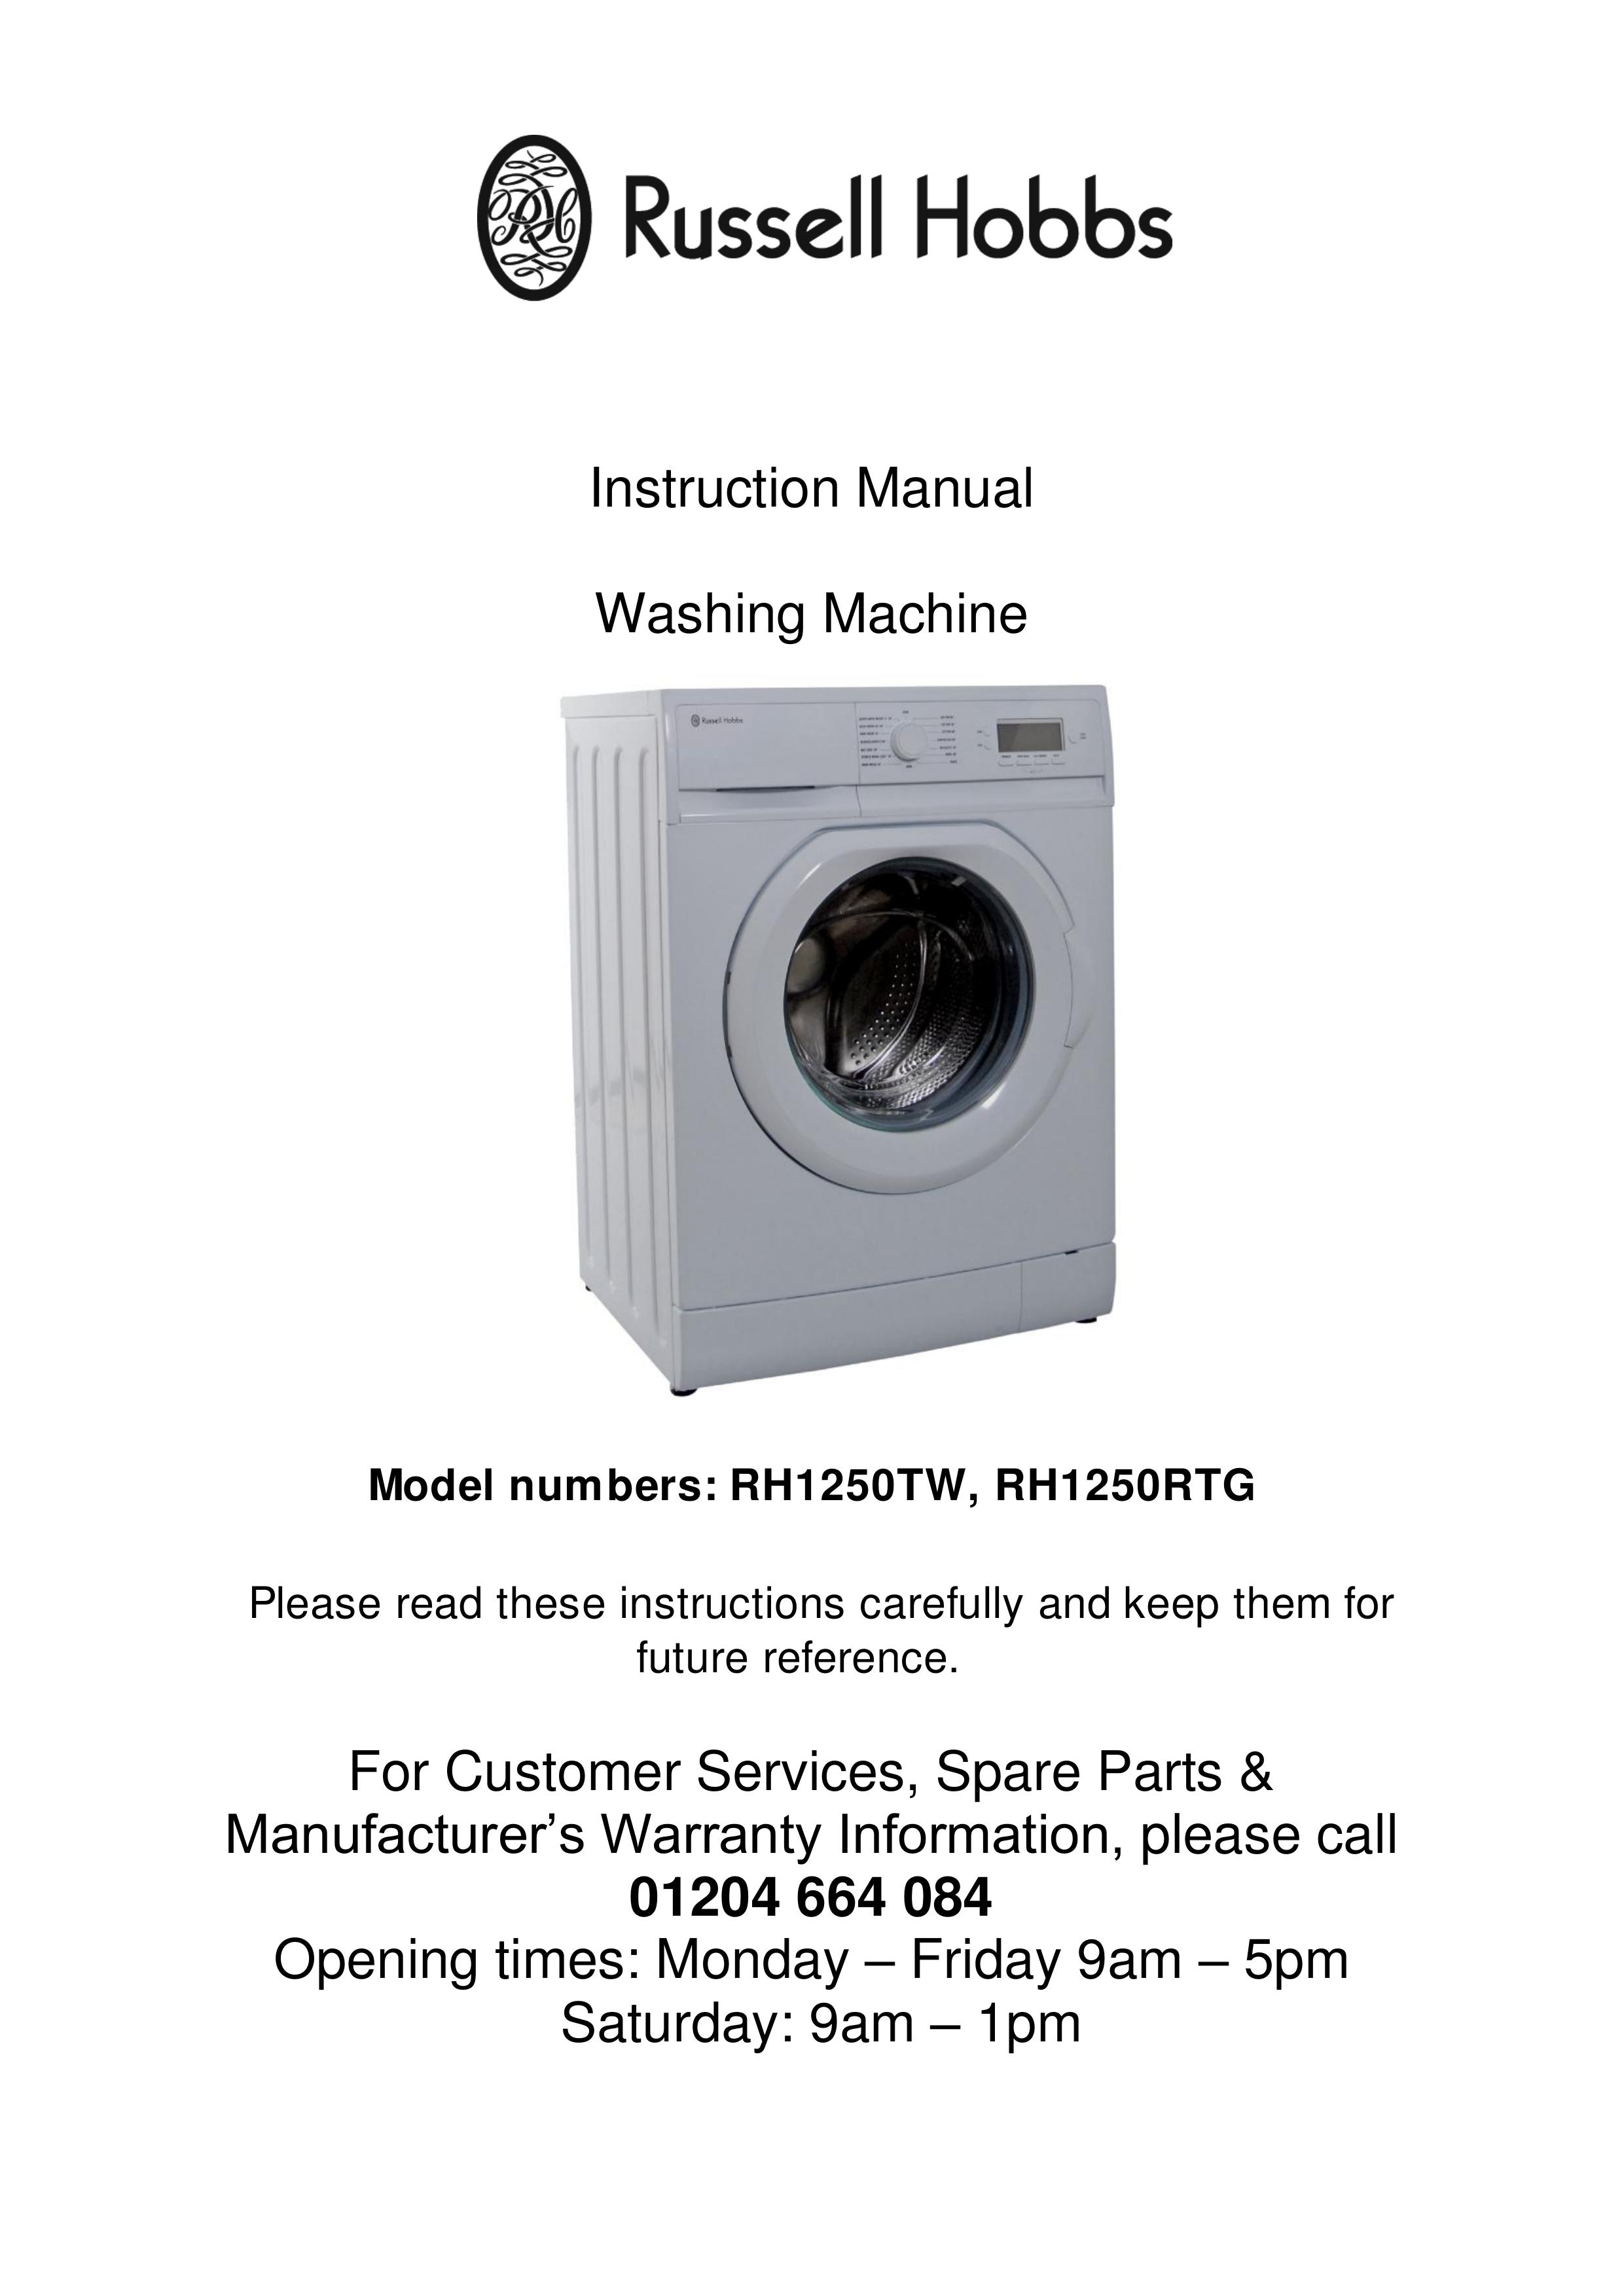 Russell Hobbs RH1250TW Washer User Manual